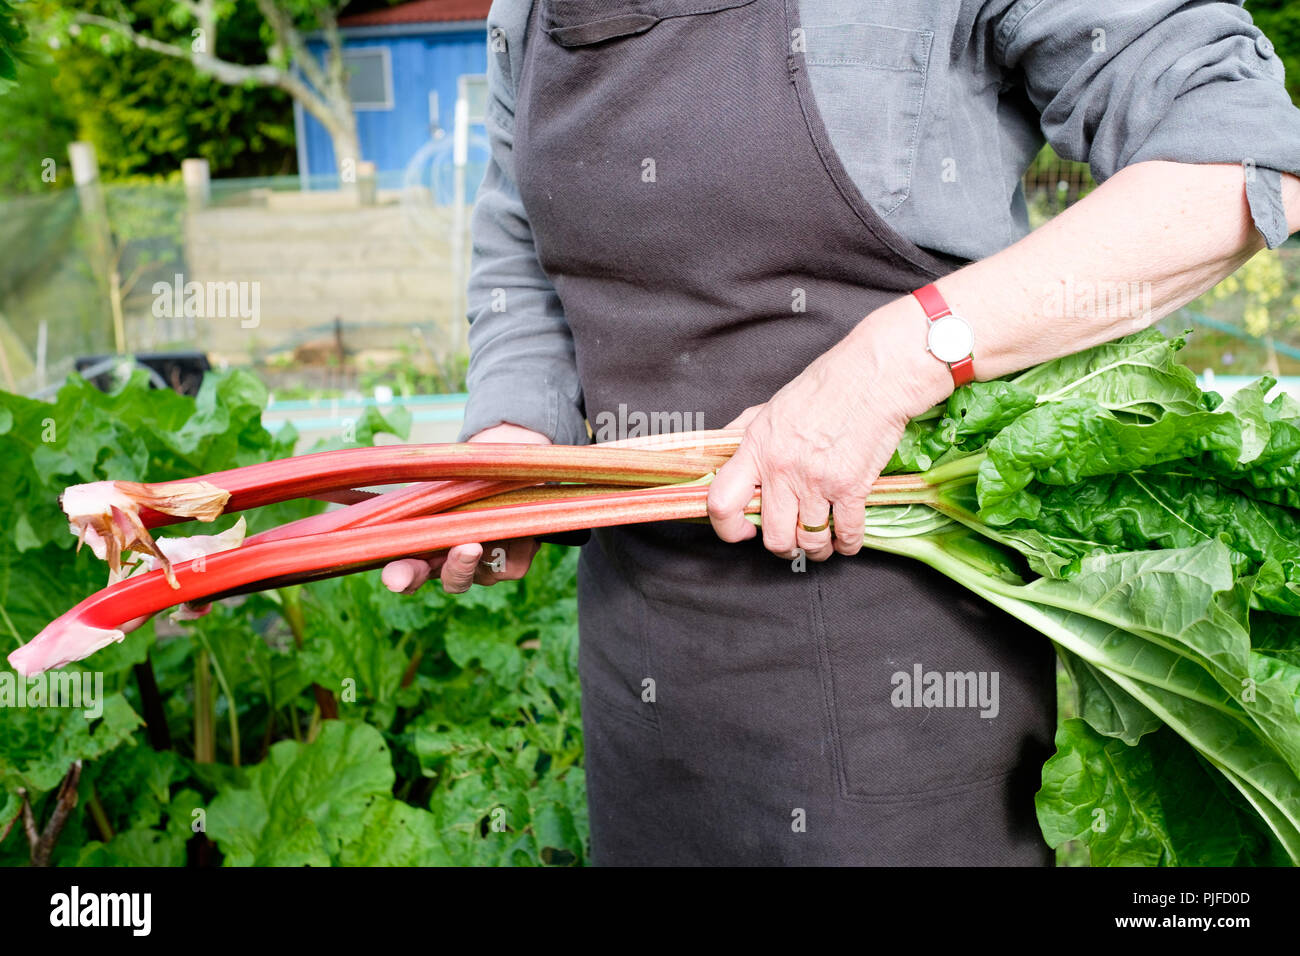 Picking rhubarb - a gardener harvests a handful of red rhubarb stalks with their leaves attached. Stock Photo